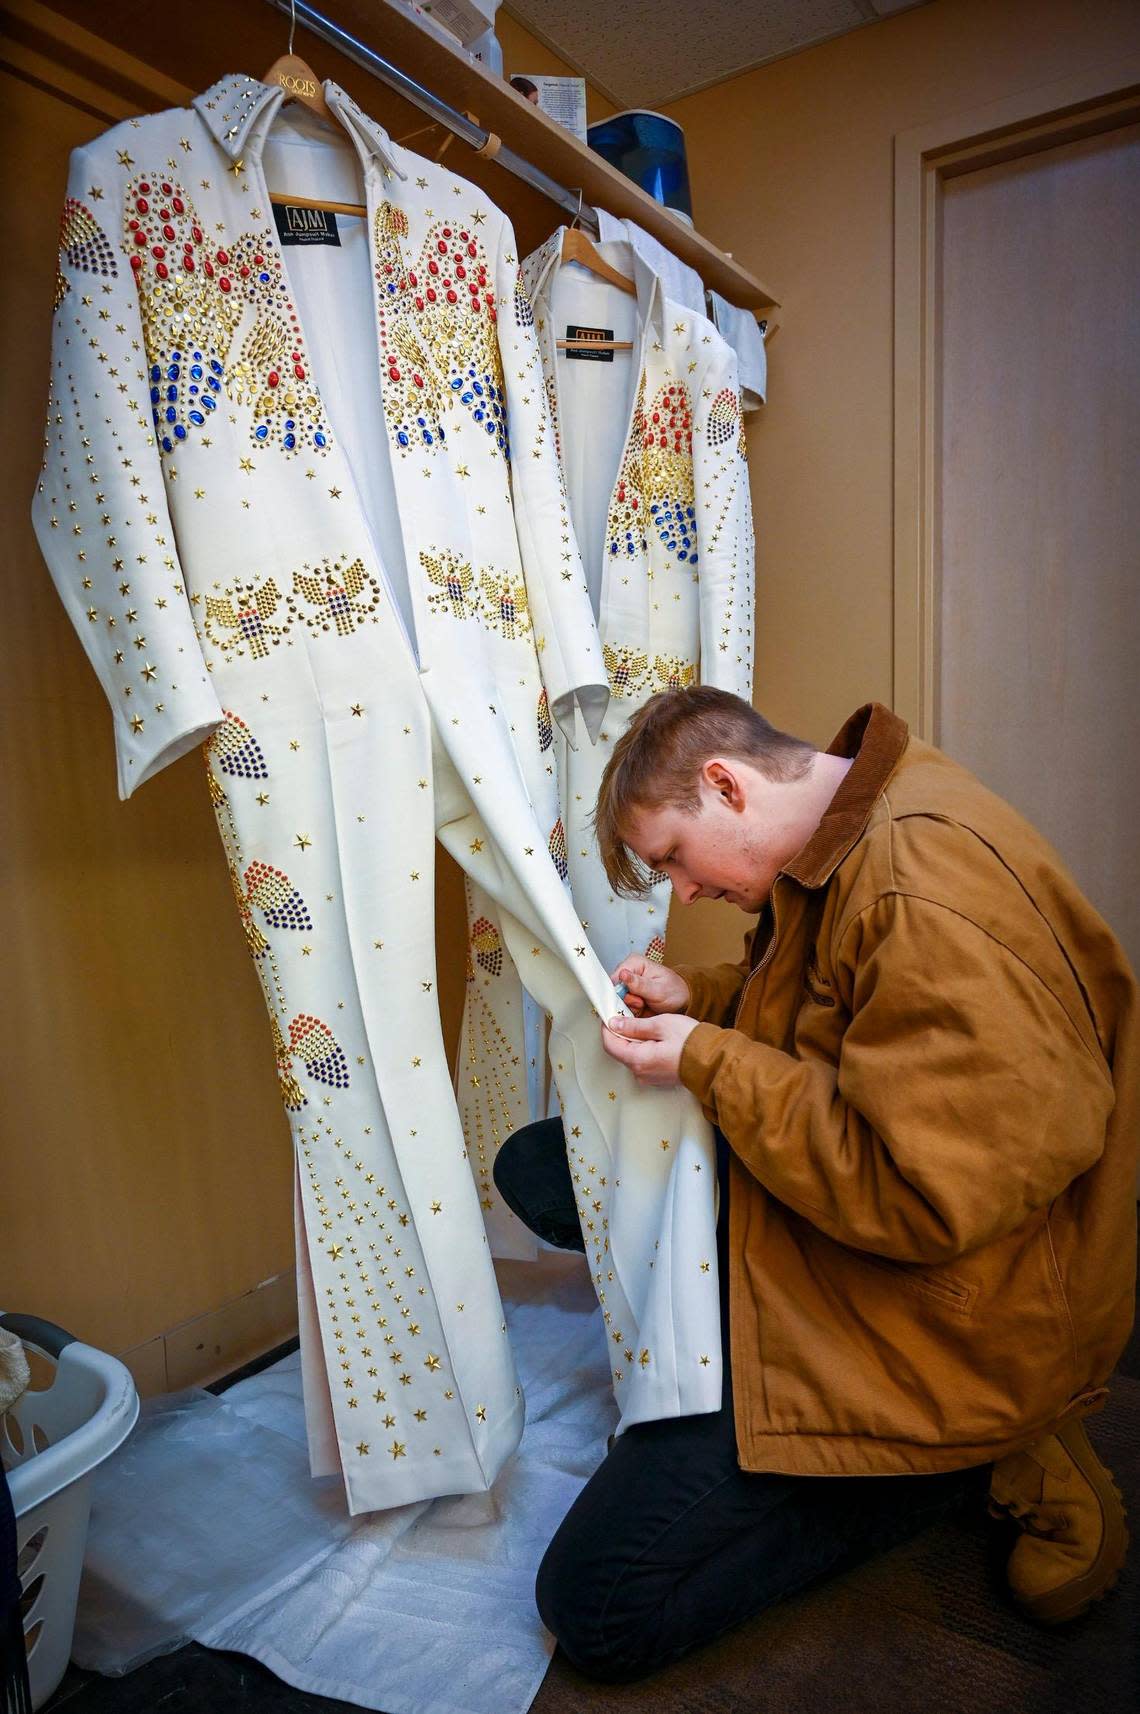 Jak Bush, an assistant stage technician, uses a toothbrush to remove a tiny spot from the Aloha white jumpsuit that will be worn by Trevino during the show. Bush was working on the suit about two hours before Trevino took the stage.